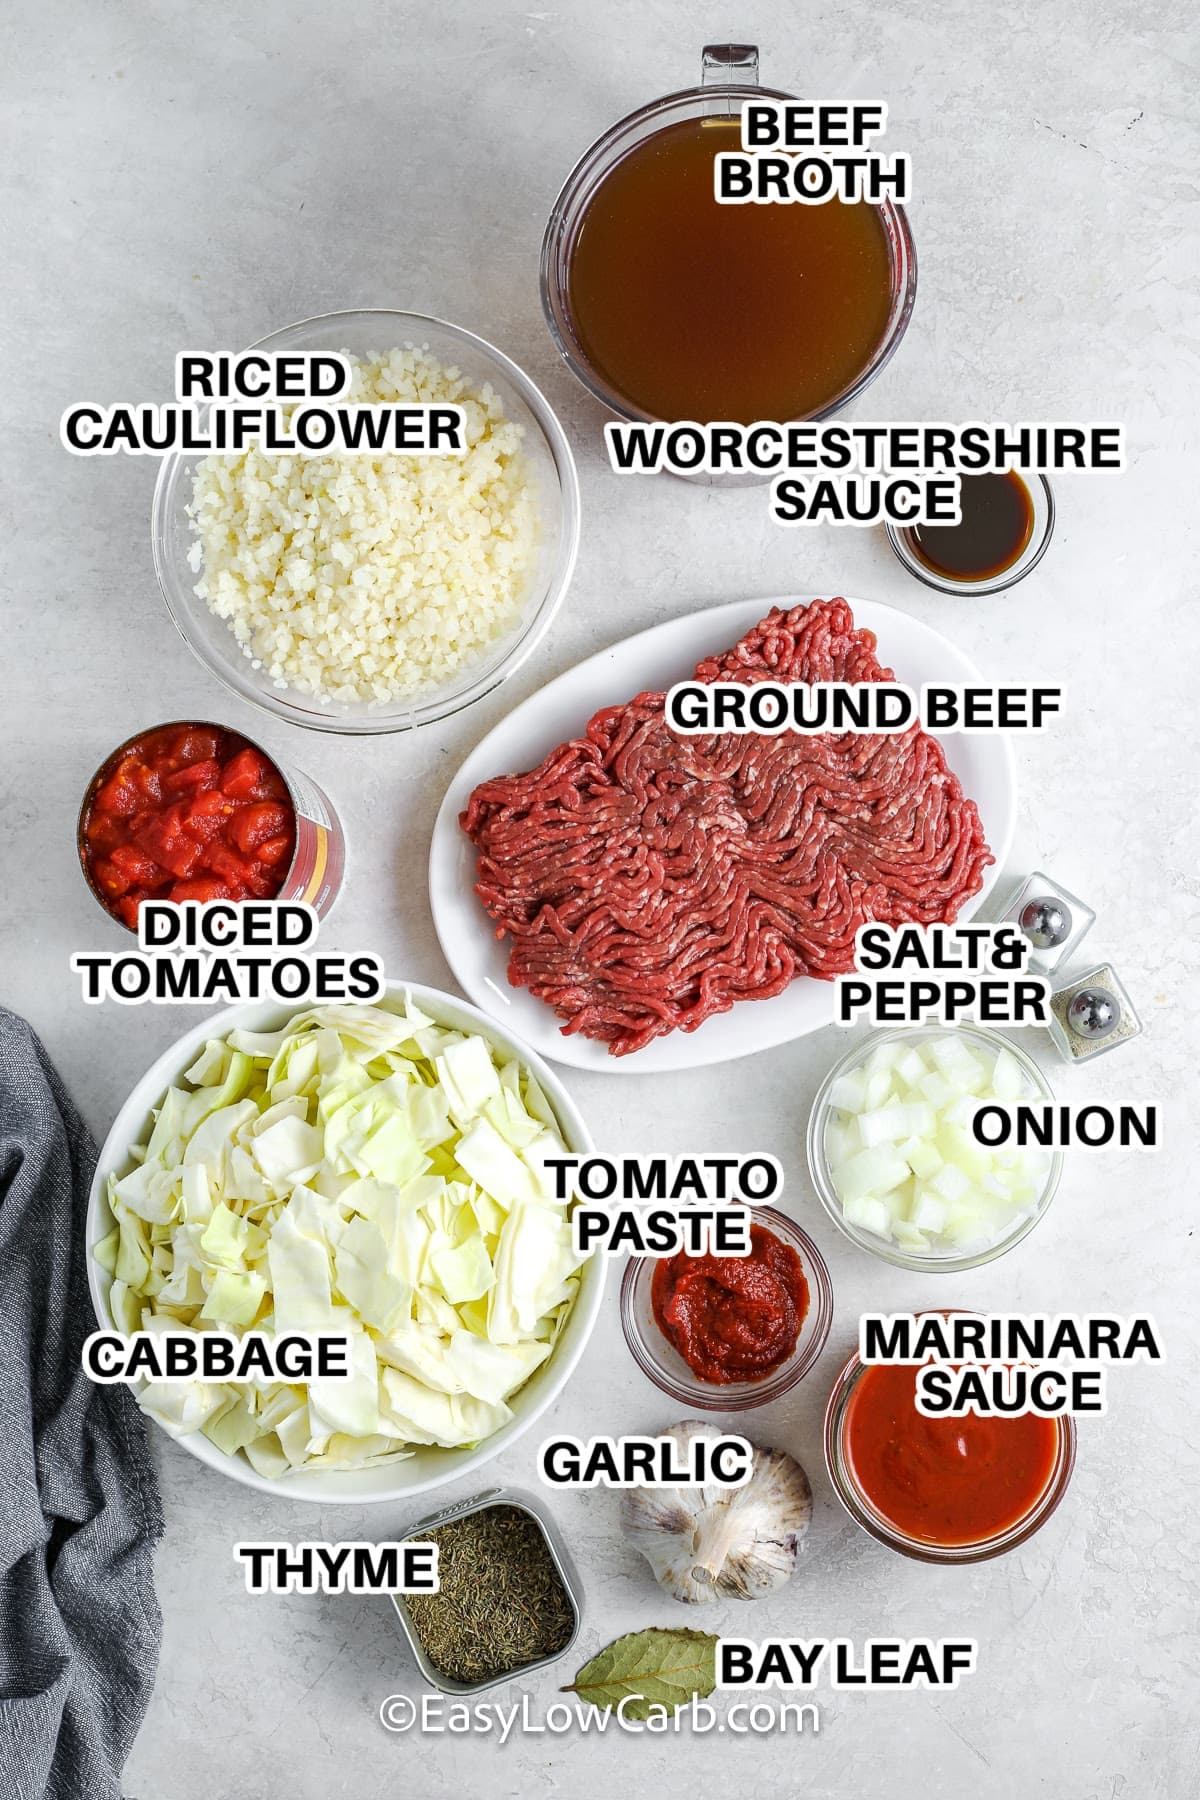 Ingredients to make cabbage roll soup labeled:beef broth, worcestershire sauce, riced cauliflower, ground beef, salt & pepper, diced tomatoes, cabbage, tomato paste, onion, marinara sauce, garlic, thyme, bay leaf